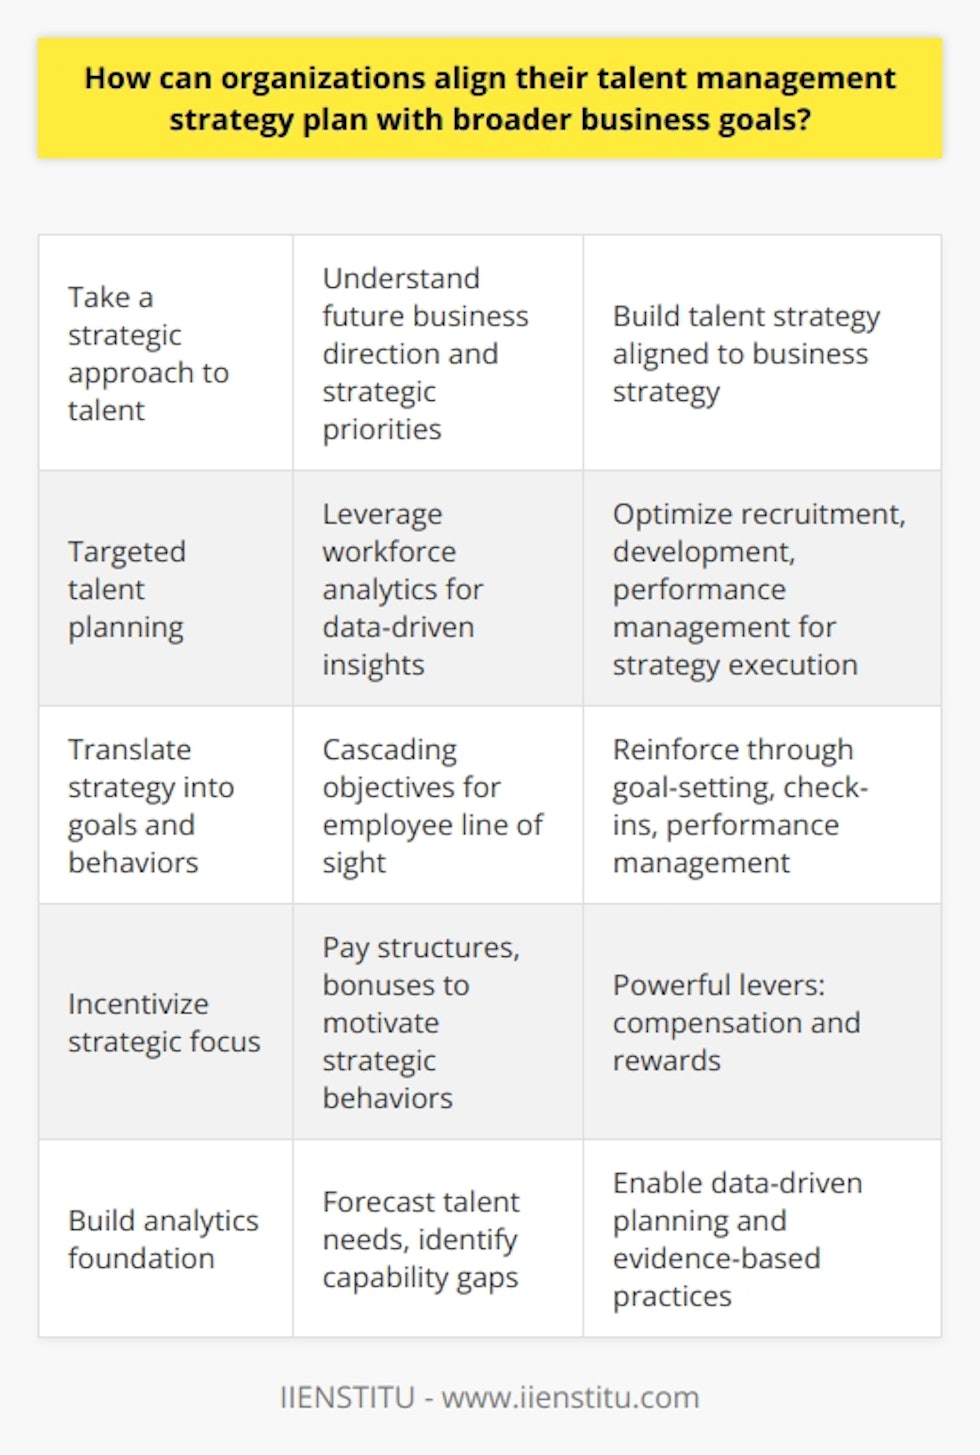 Here is some unique content on aligning talent management and business strategy without mentioning any brands:Taking a Strategic Approach to TalentFor talent management initiatives to truly drive business performance, they cannot operate in a silo. Organizations need an integrated talent strategy that is directly linked to overarching business goals. This requires viewing and developing talent through a strategic lens.The starting point is understanding future business direction and having clarity on strategic priorities. What capabilities will the organization need to compete and succeed? This provides the foundation to build a complementary talent strategy. With strategy as the guide, organizations can take a targeted approach to talent planning. Workforce analytics offer data-driven insights about upcoming needs and gaps. Strategic job analysis identifies the competencies most critical for strategic roles. Companies can then customize recruitment, development programs, performance management, and other talent practices to optimize the workforce for business strategy execution.Fostering Goal Alignment Alignment also requires translating high-level strategy into goals and behaviors throughout the talent lifecycle. Cascading objectives gives employees line of sight into how their efforts connect to the big picture. Goal-setting, regular check-ins, and tying performance management to business results all help reinforce this.Compensation and rewards are powerful tools to incentivize strategic focus from individuals and teams. Pay structures, bonuses, and other incentives can be designed to motivate behaviors that fuel important business goals.Building an Analytics FoundationData and analytics create the foundation for strategic talent decisions. Workforce analytics allow organizations to forecast talent needs, identify capability gaps, and predict the business impact of talent investments. This enables data-driven workforce planning and evidence-based talent practices.Integrated HR systems provide the technology infrastructure to support analytics. They also allow organizations to continuously refine talent practices based on outcomes and business relevance. With strategy guiding talent and talent enabling strategy, organizations can unlock the full power of human capital to drive performance and competitive advantage. This level of alignment requires viewing talent through a business lens - but delivers outsized rewards.